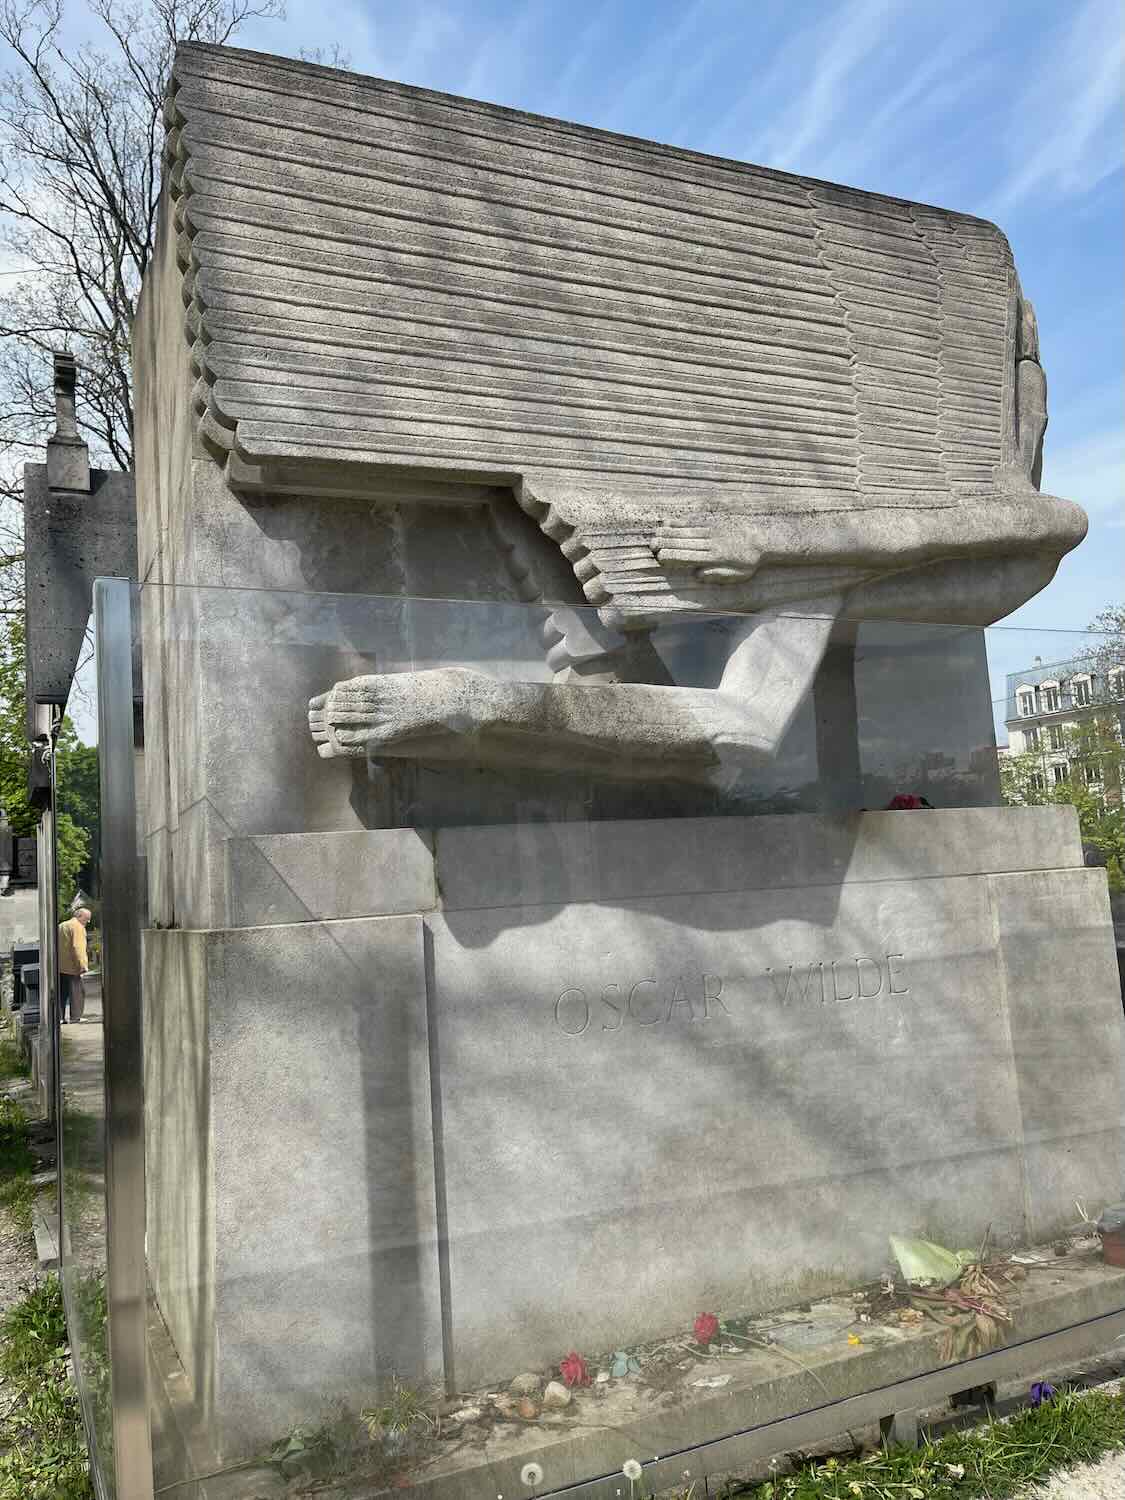 he tomb features a modernist angel sculpture leaning sorrowfully on a stone.